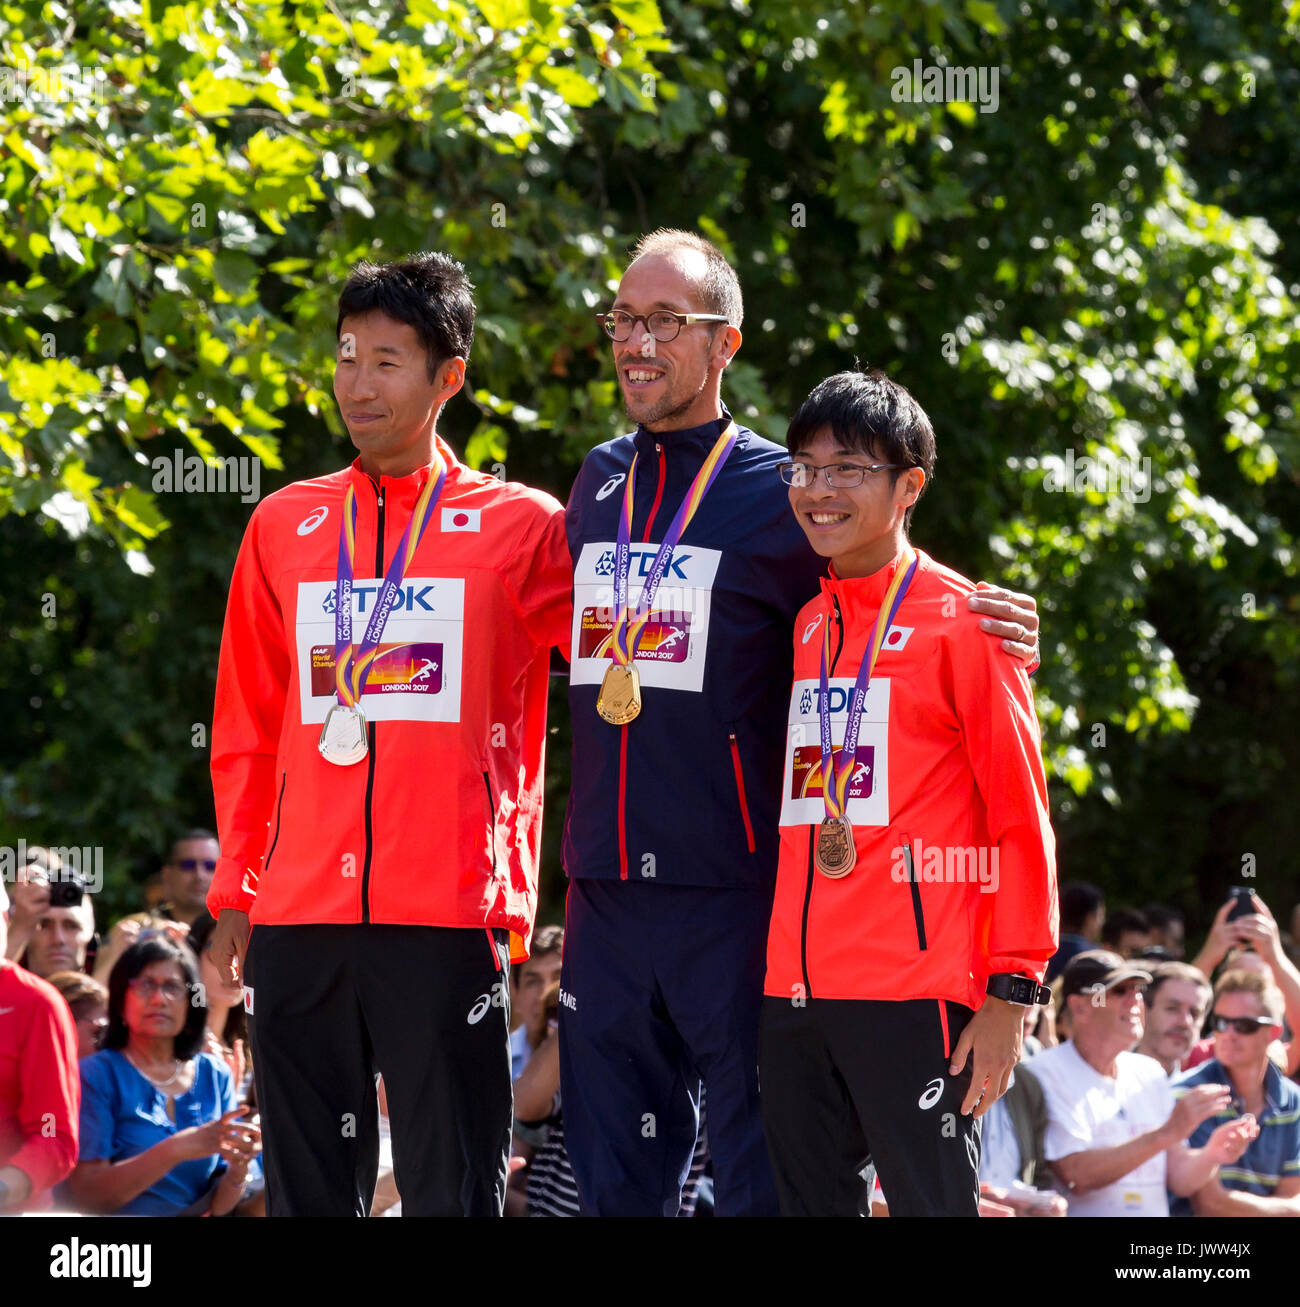 London, UK. 13th August, 2017. Hirooki Arai (silver),  Yohann Diniz (gold) and  Kai Kobayashi (bronze) at  decoration ceremony, Race Walk at IAAF World Championships in London, UK on August 13, 2017. The race took place on The Mall, most picturesque street of London and attracted thousands spectators. Credit: Dominika Zarzycka/Alamy Live News Stock Photo